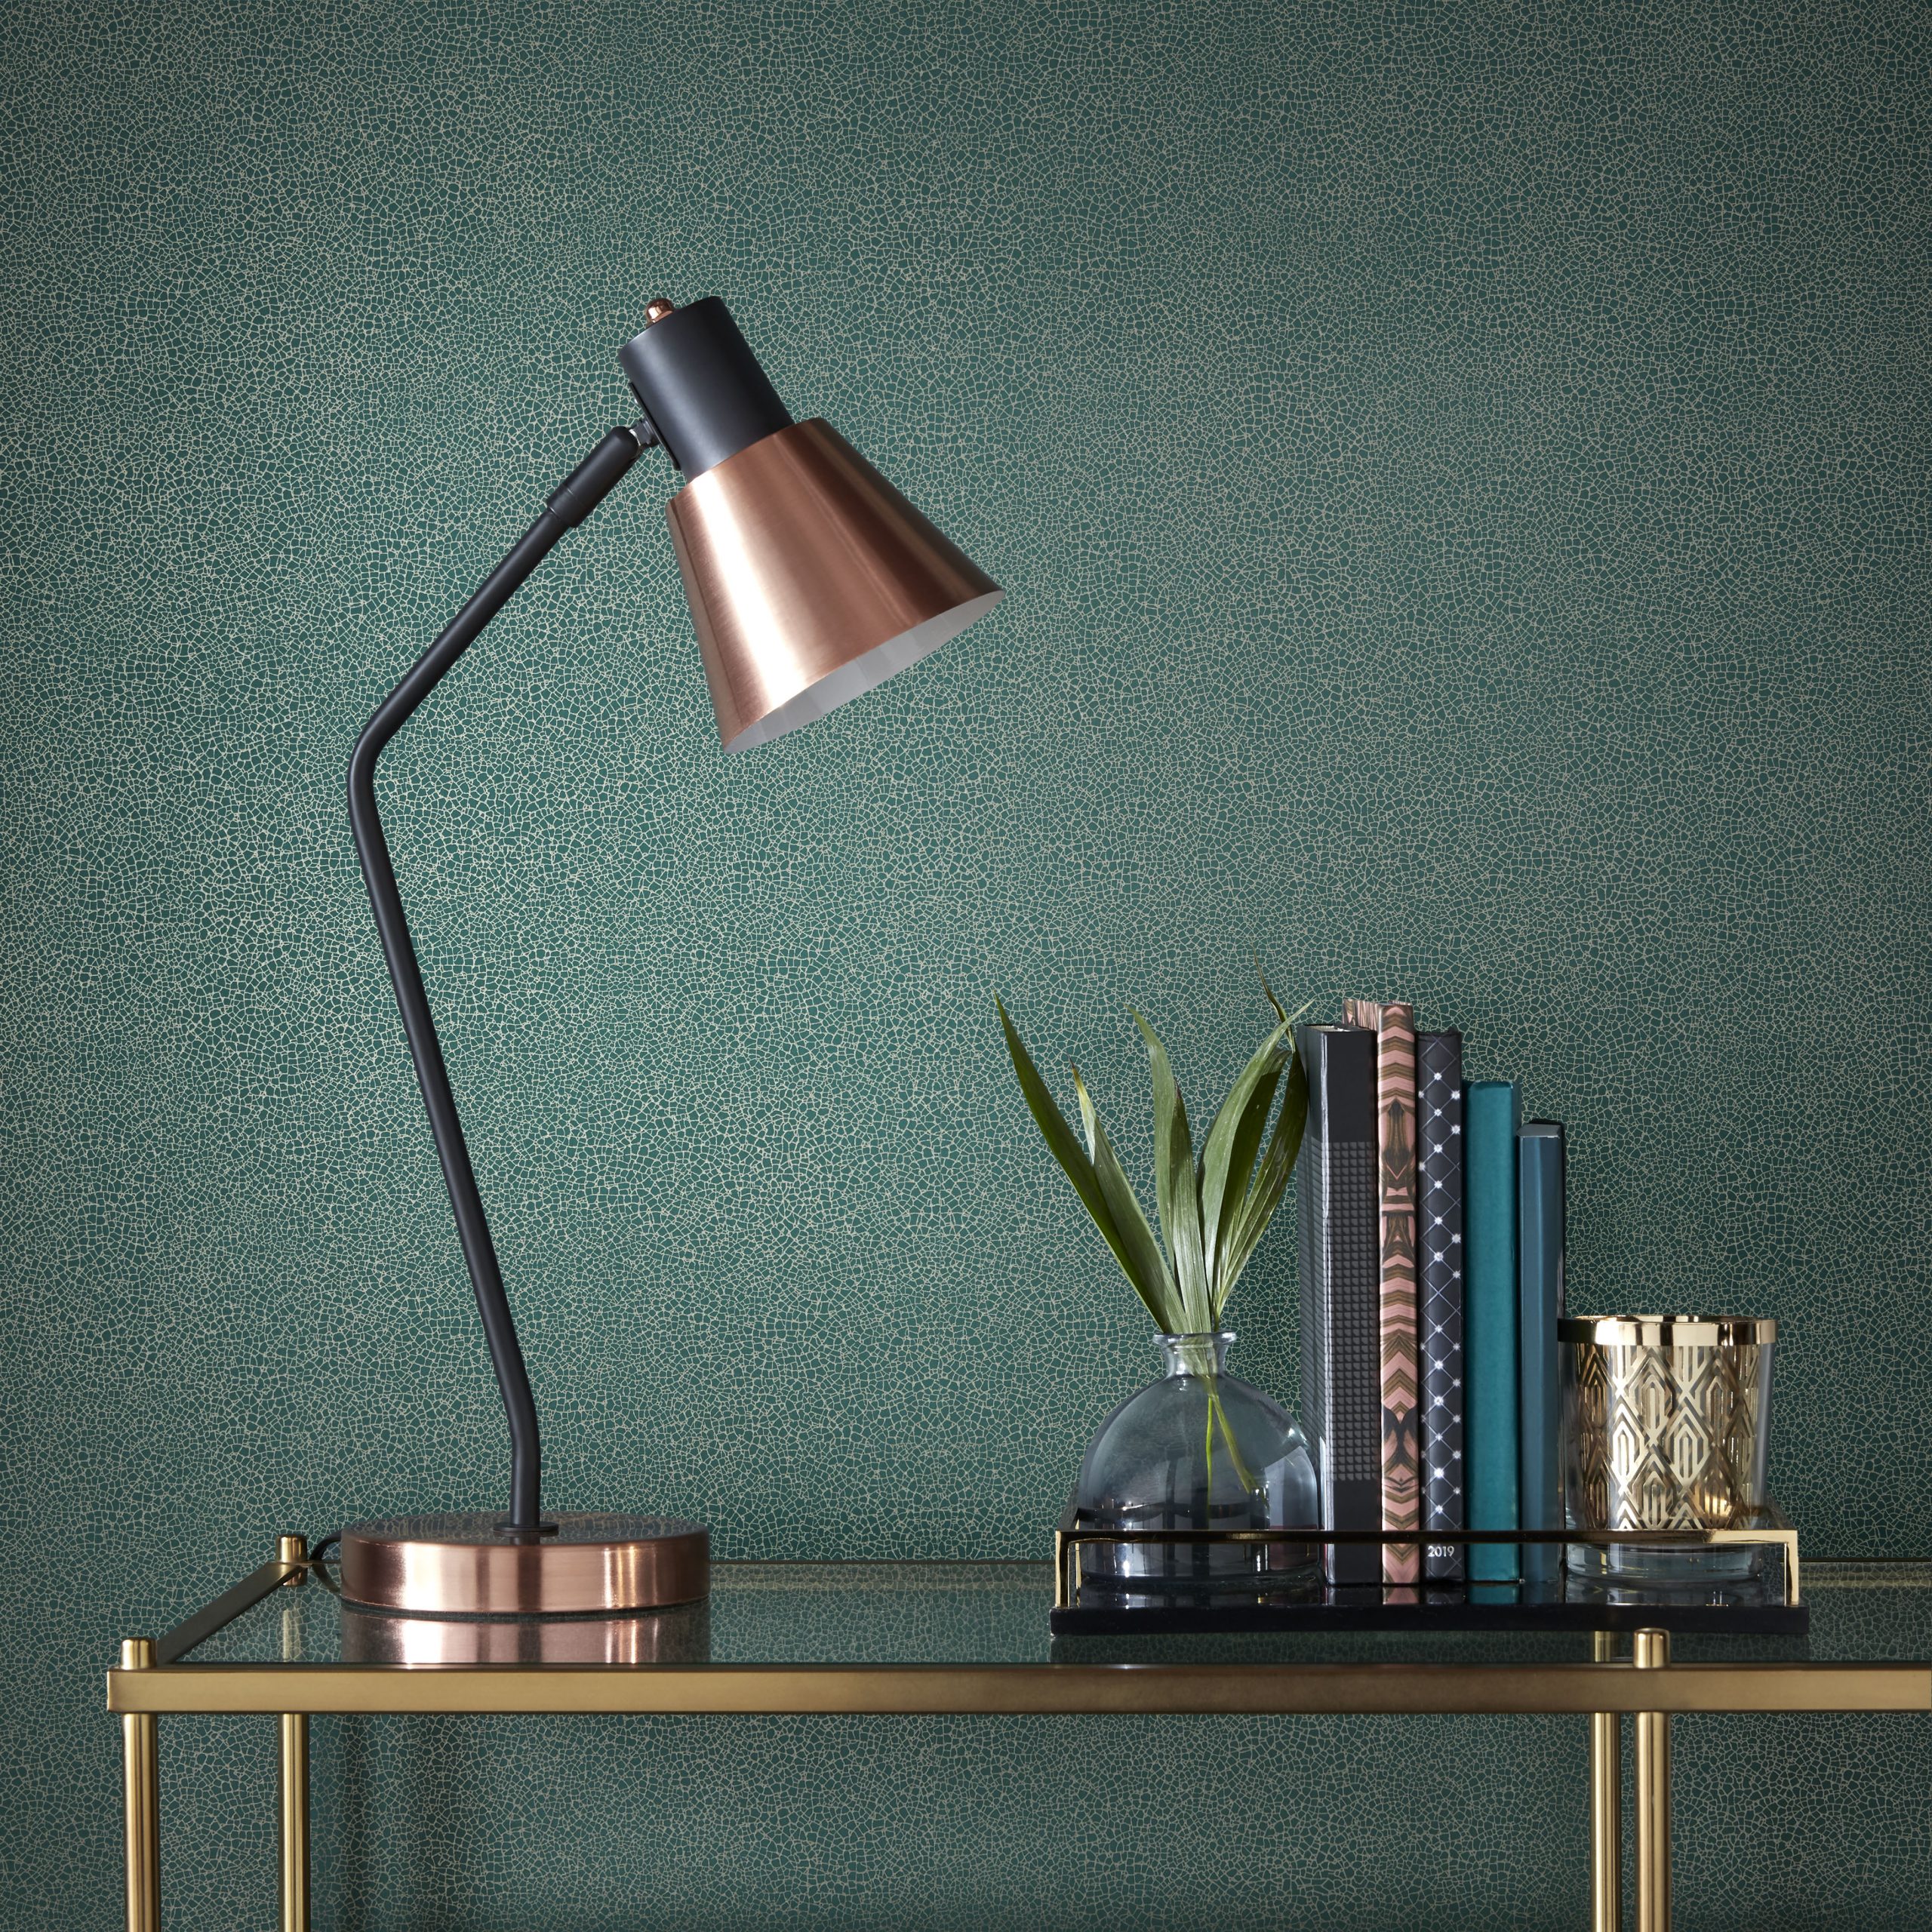 Tapet Emile, Emerald Green Luxury Crackle, 1838 Wallcoverings, 5.3mp / rola 1838